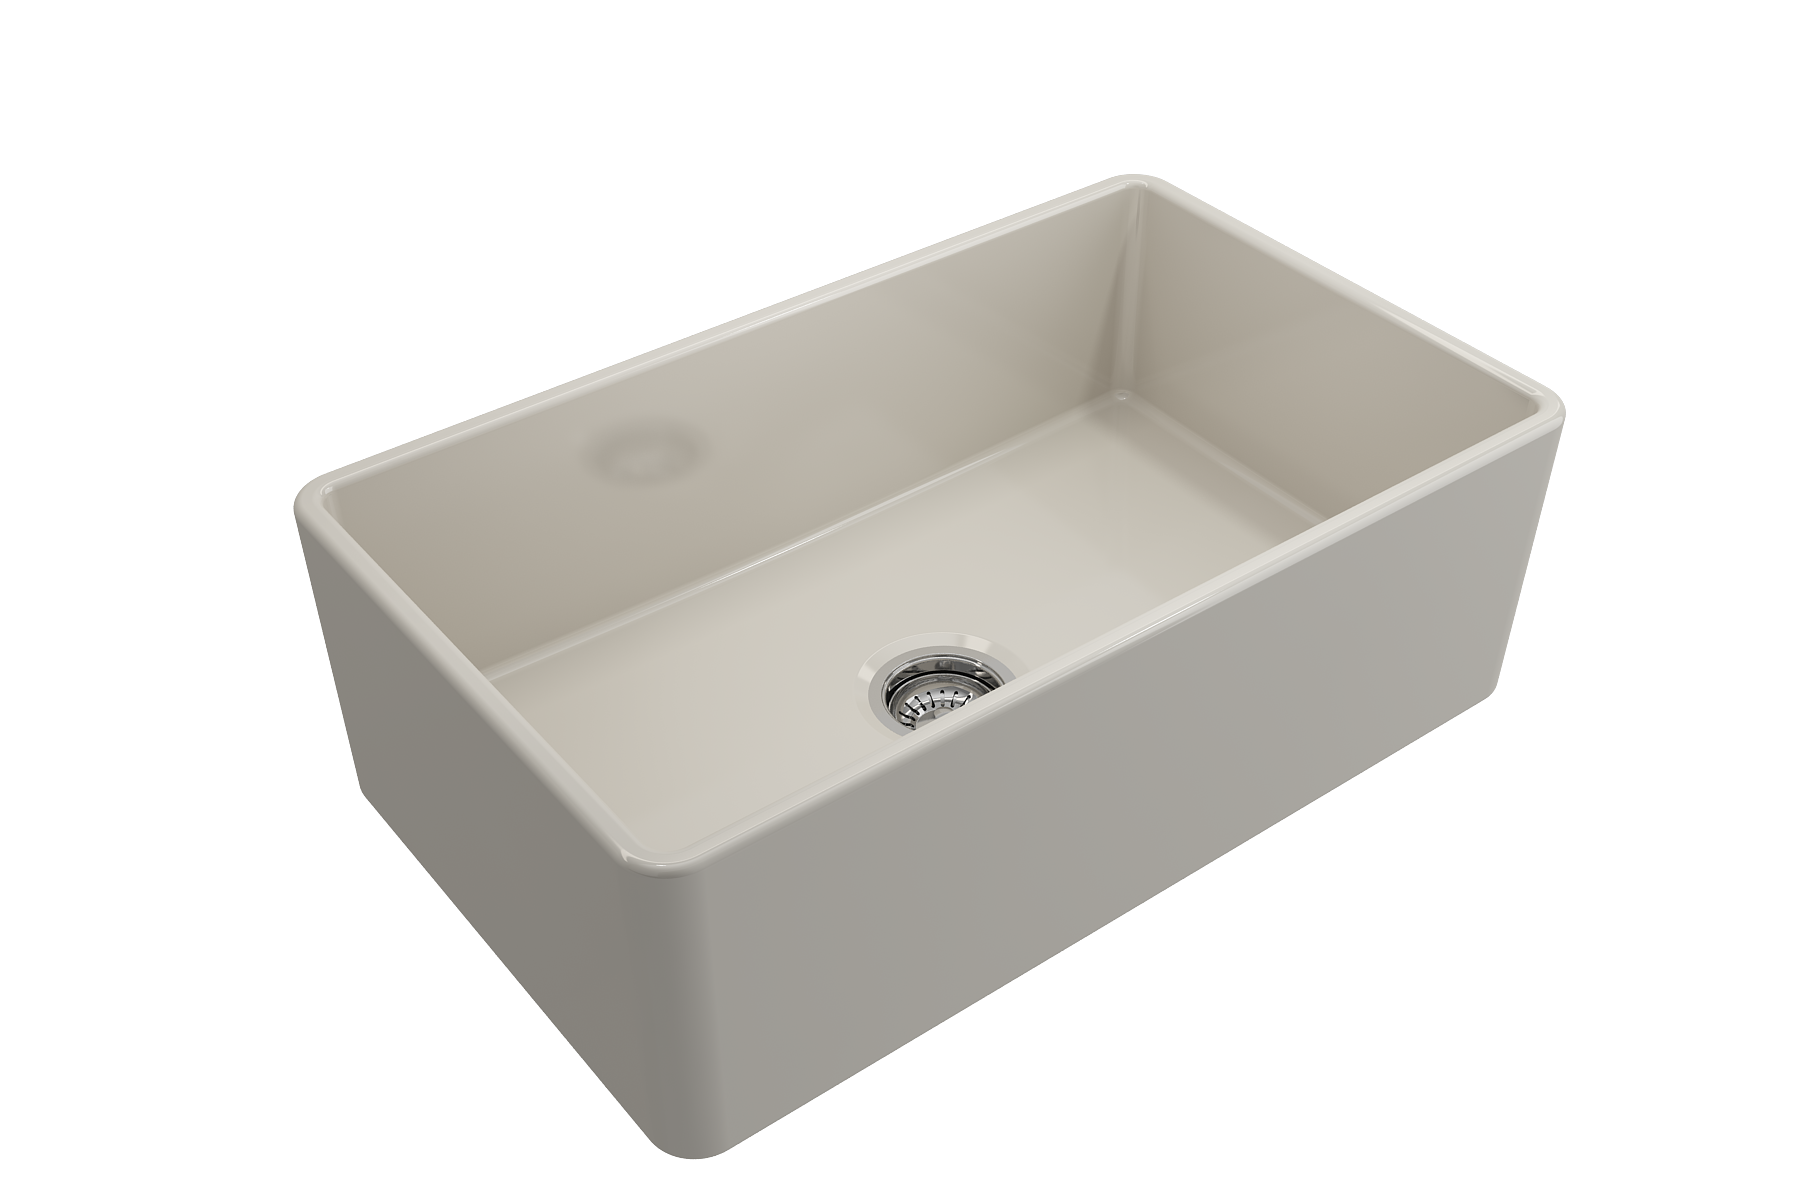 Bocchi Classico Farmhouse Apron Front Fireclay 30" Single Bowl Kitchen Sink with Protective Bottom Grid and Strainer, Available in 9 colors!